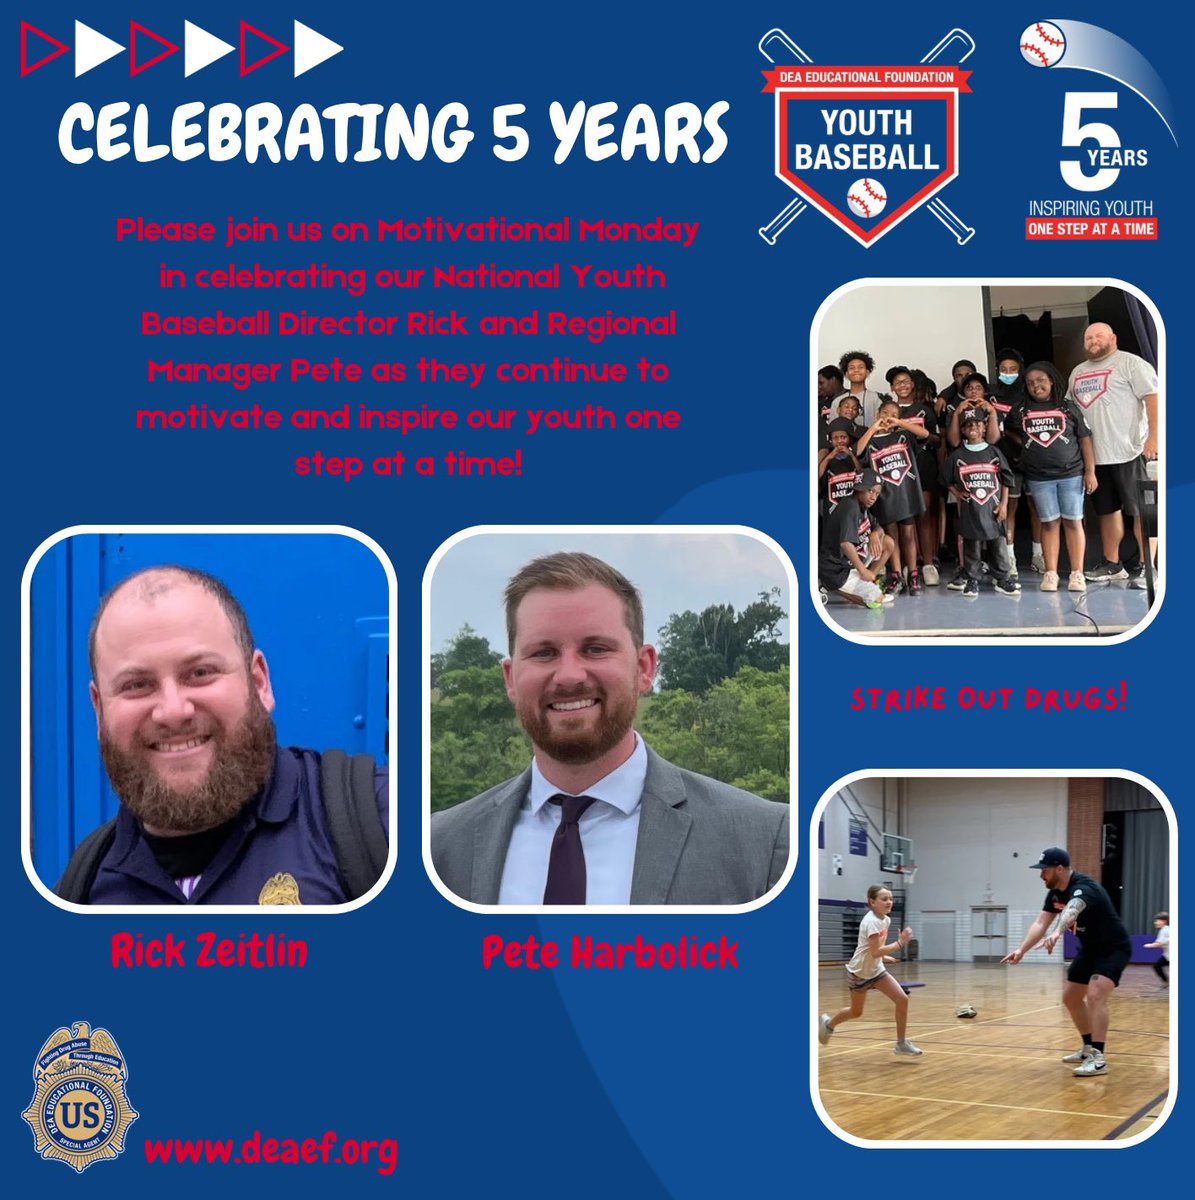 Join us on #MotivationalMonday in celebrating our Nat’l Youth Baseball Director Rick & Regional Manager Pete as they continue to motivate & inspire youth one step at a time! Visit campaign: fundraise.givesmart.com/e/PjUnhA?vid=1… ⚾️⚾️⚾️⚾️